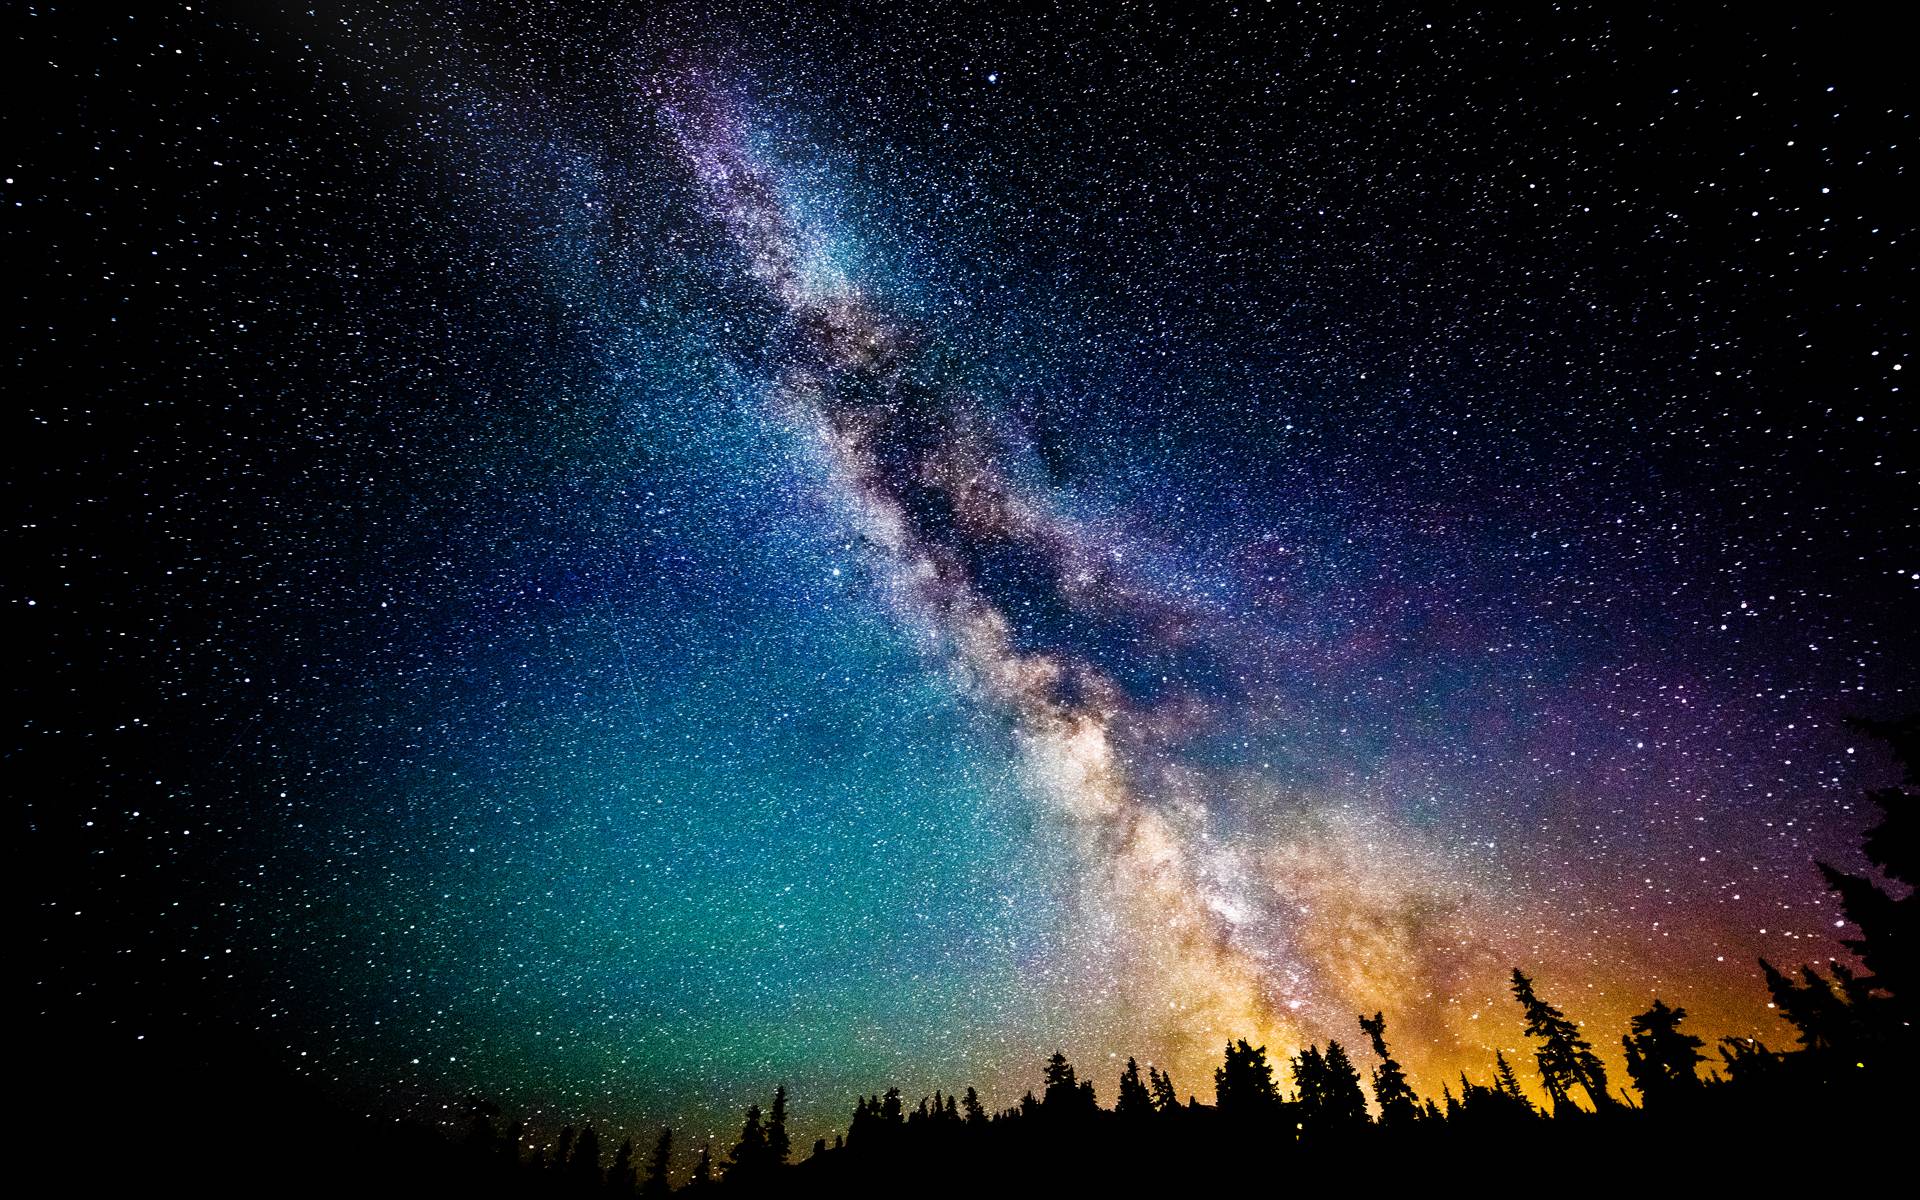 Stars Night Windows 8.1 Theme and Background. Download free